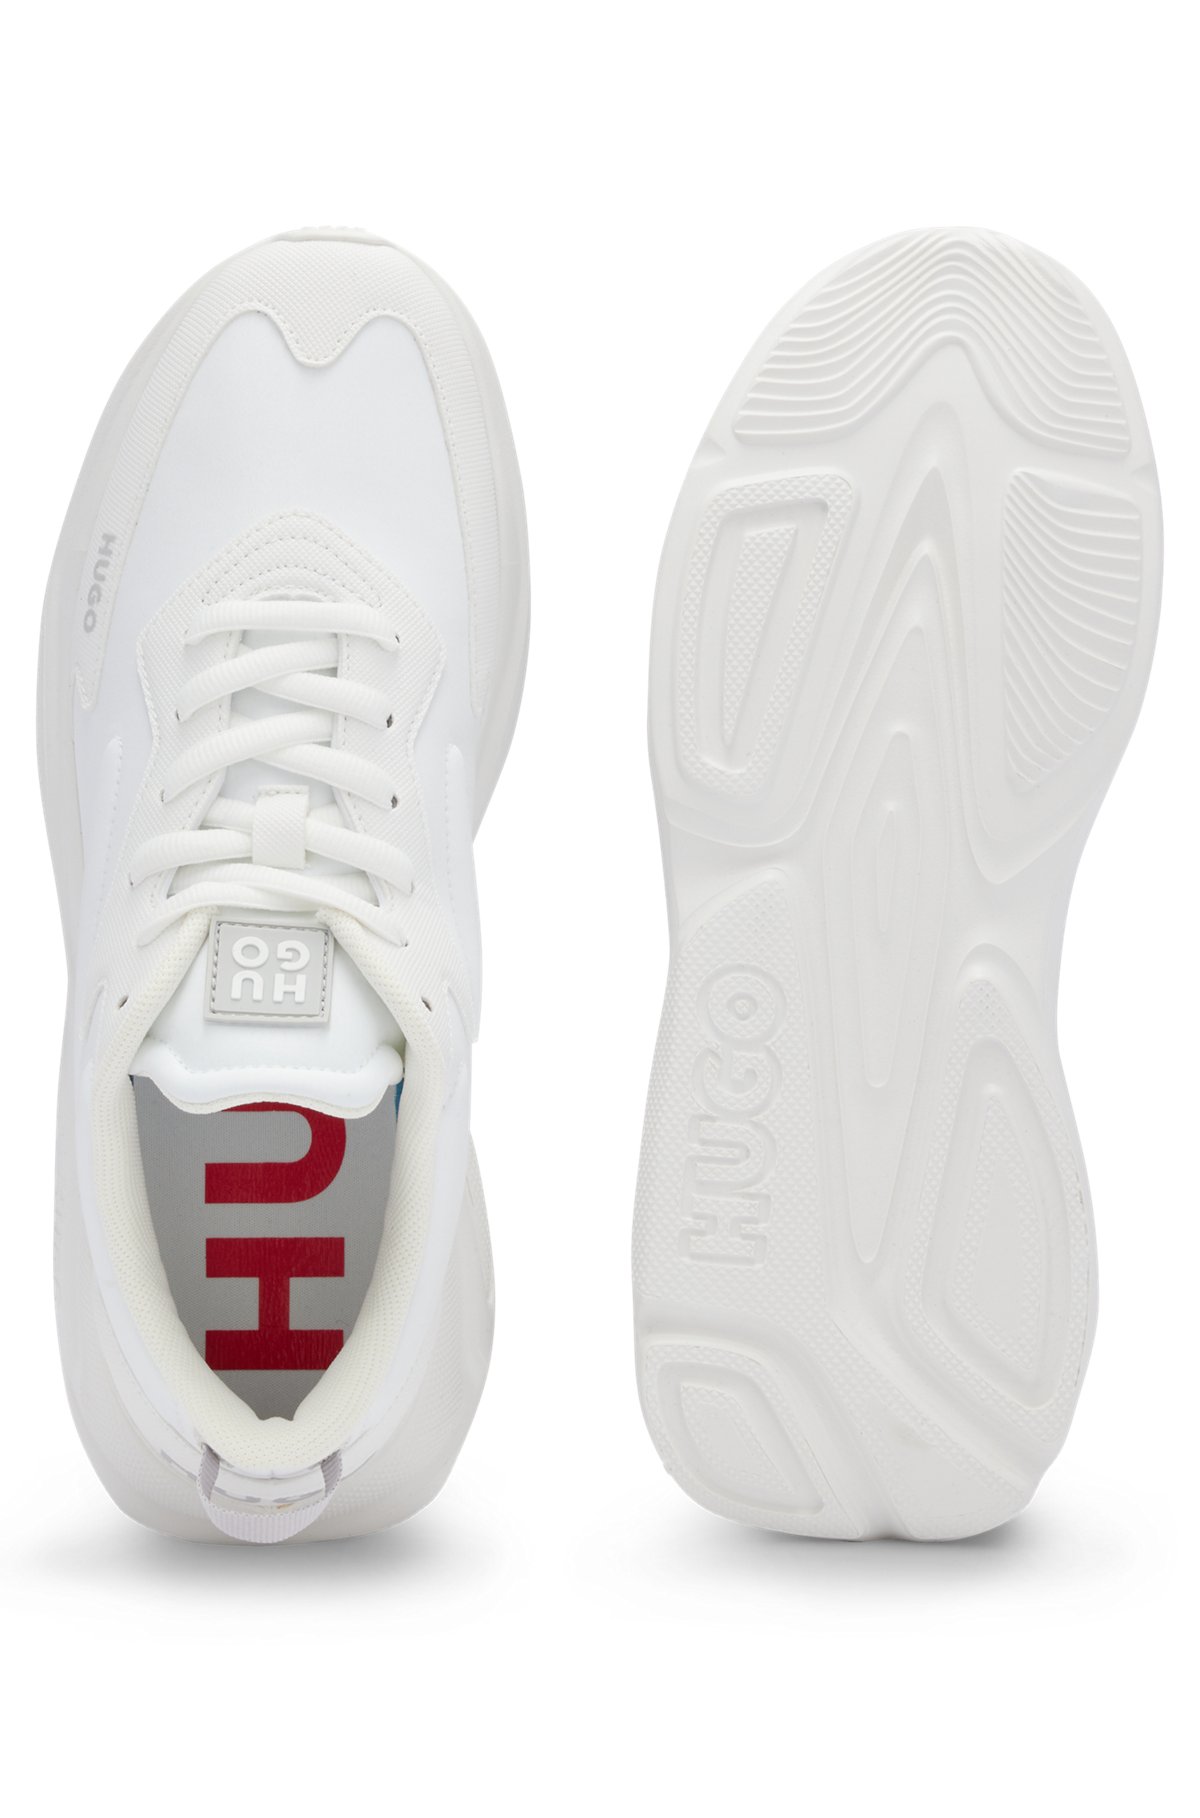 Running-style hybrid trainers with logo details, White